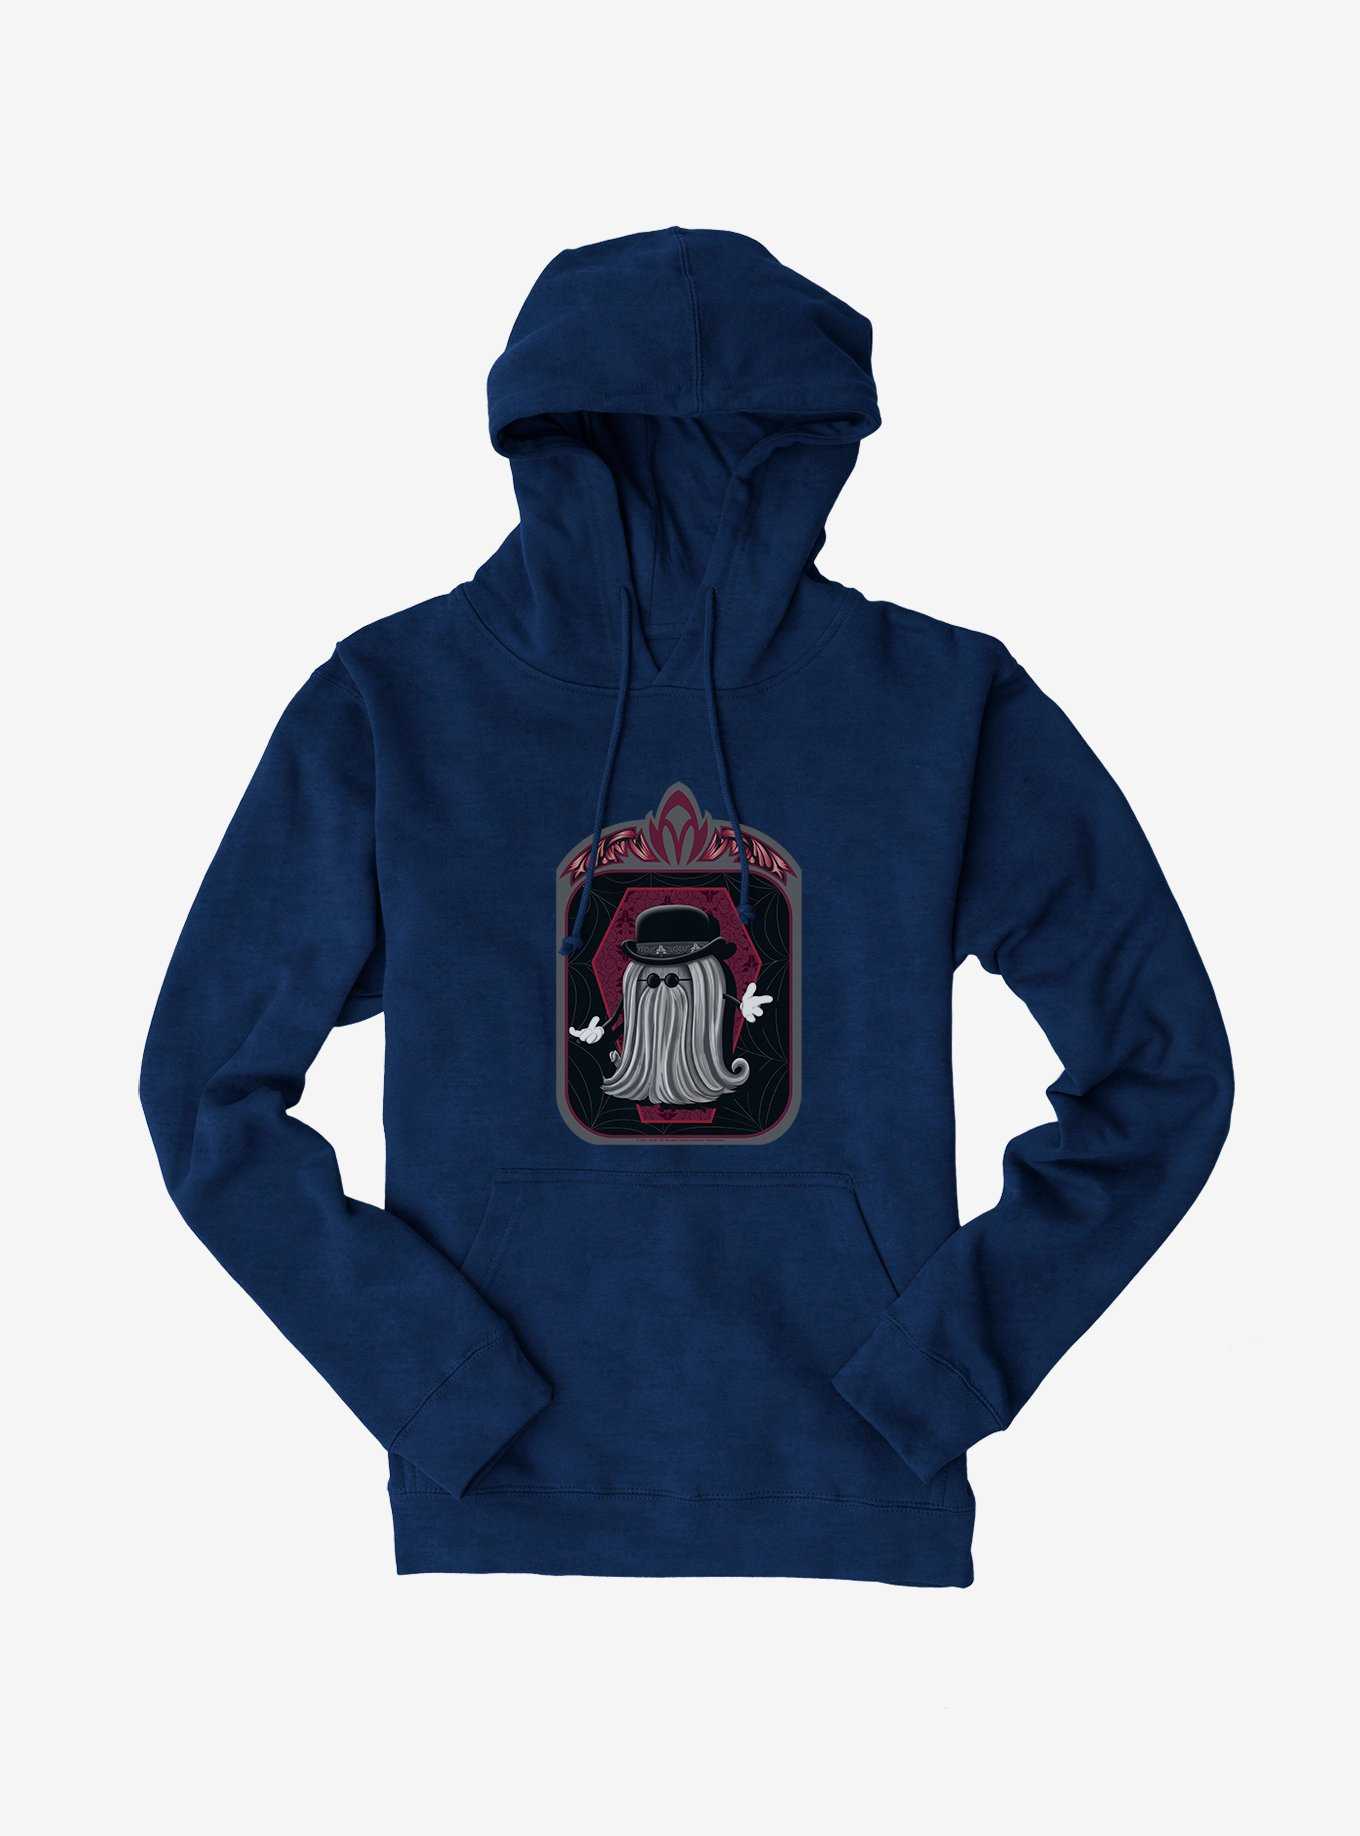 The Addams Family 2 Cousin Itt Hoodie, , hi-res